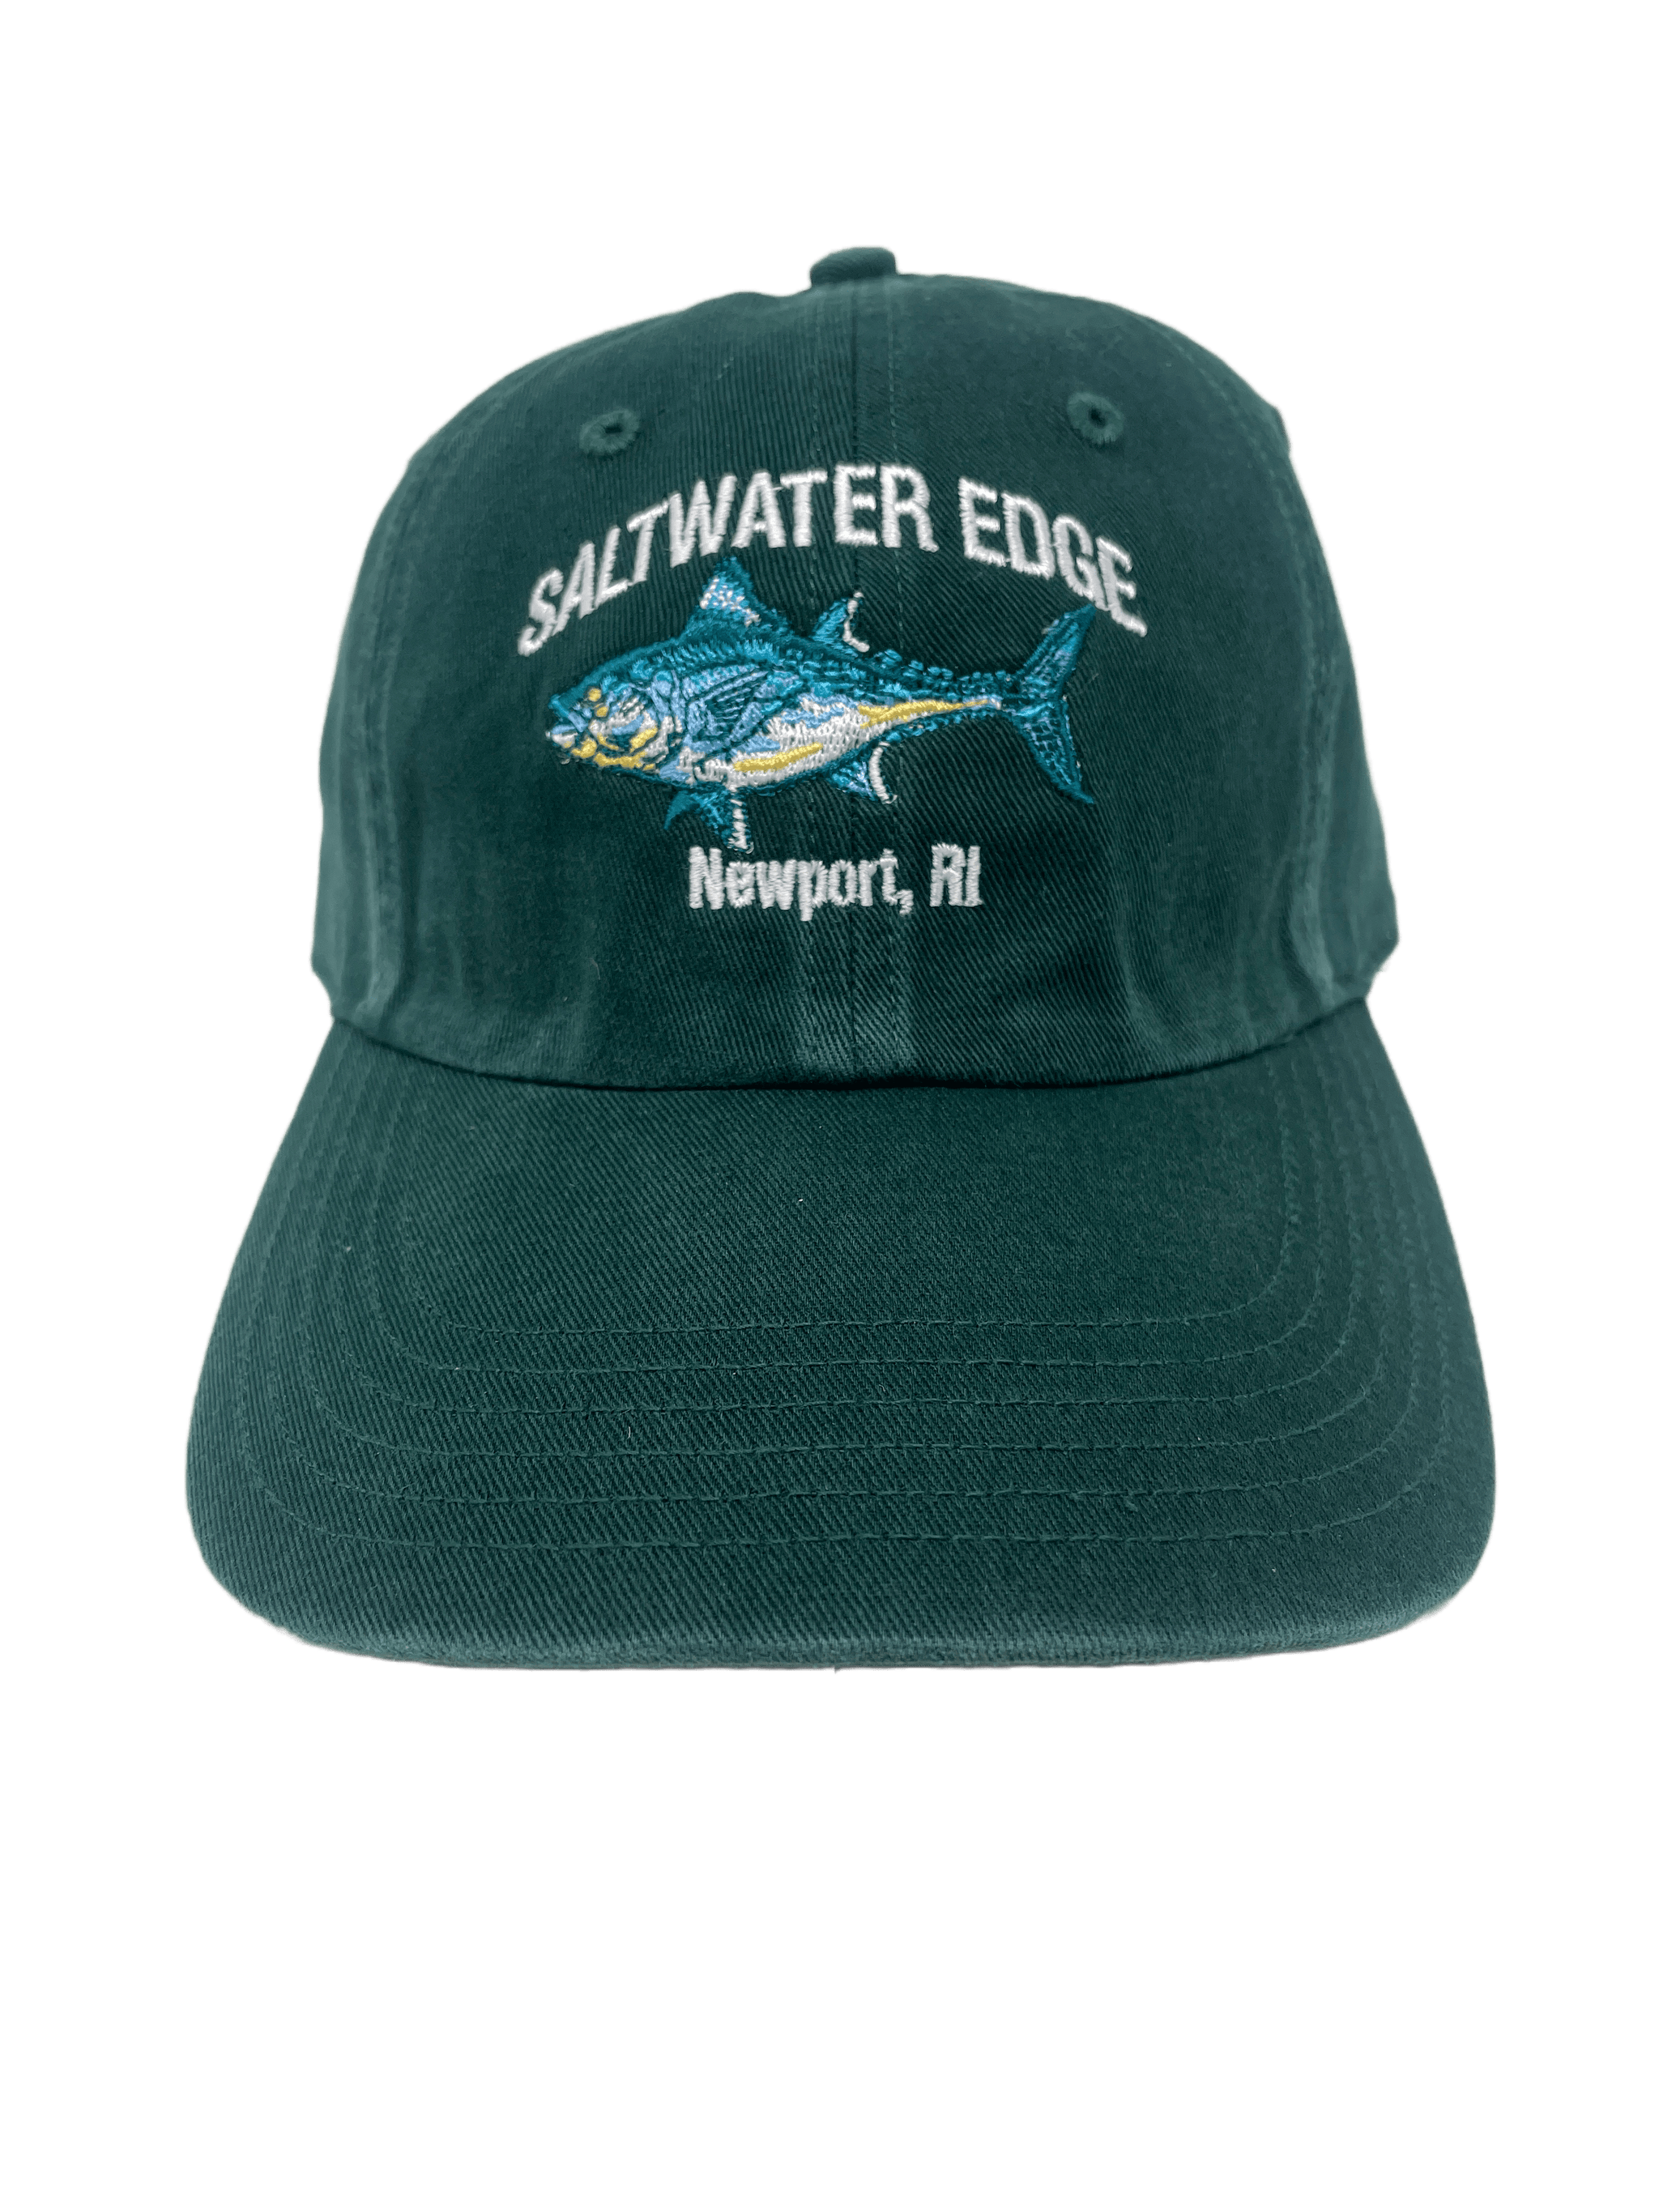 Saltwater Edge Little Tunny Hat - The Saltwater Edge